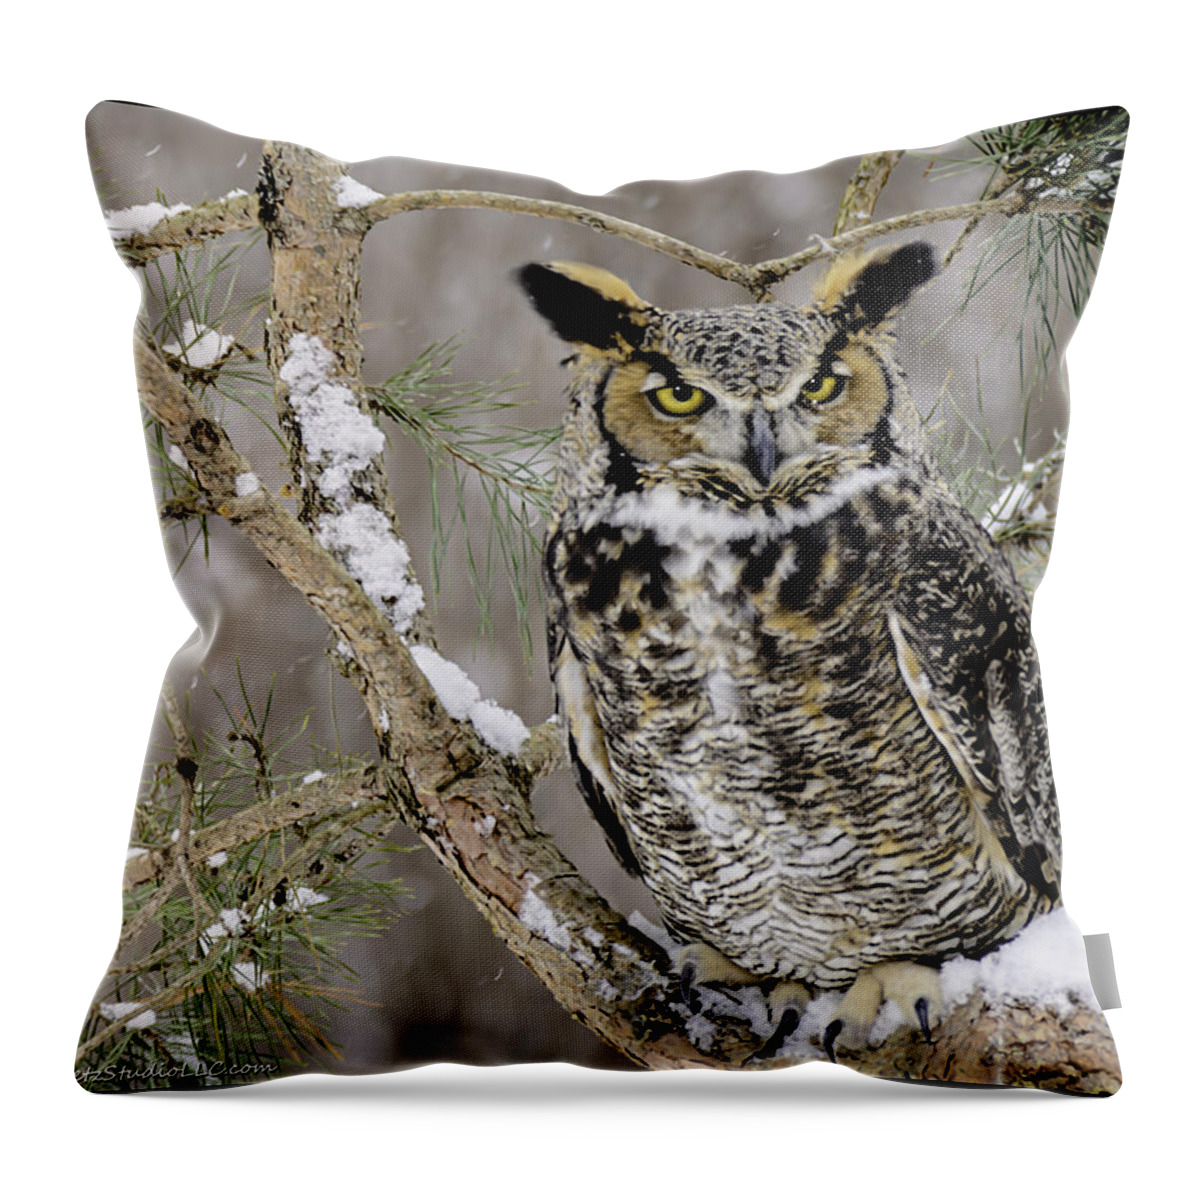 Great Throw Pillow featuring the photograph Wise Old Great Horned Owl by LeeAnn McLaneGoetz McLaneGoetzStudioLLCcom